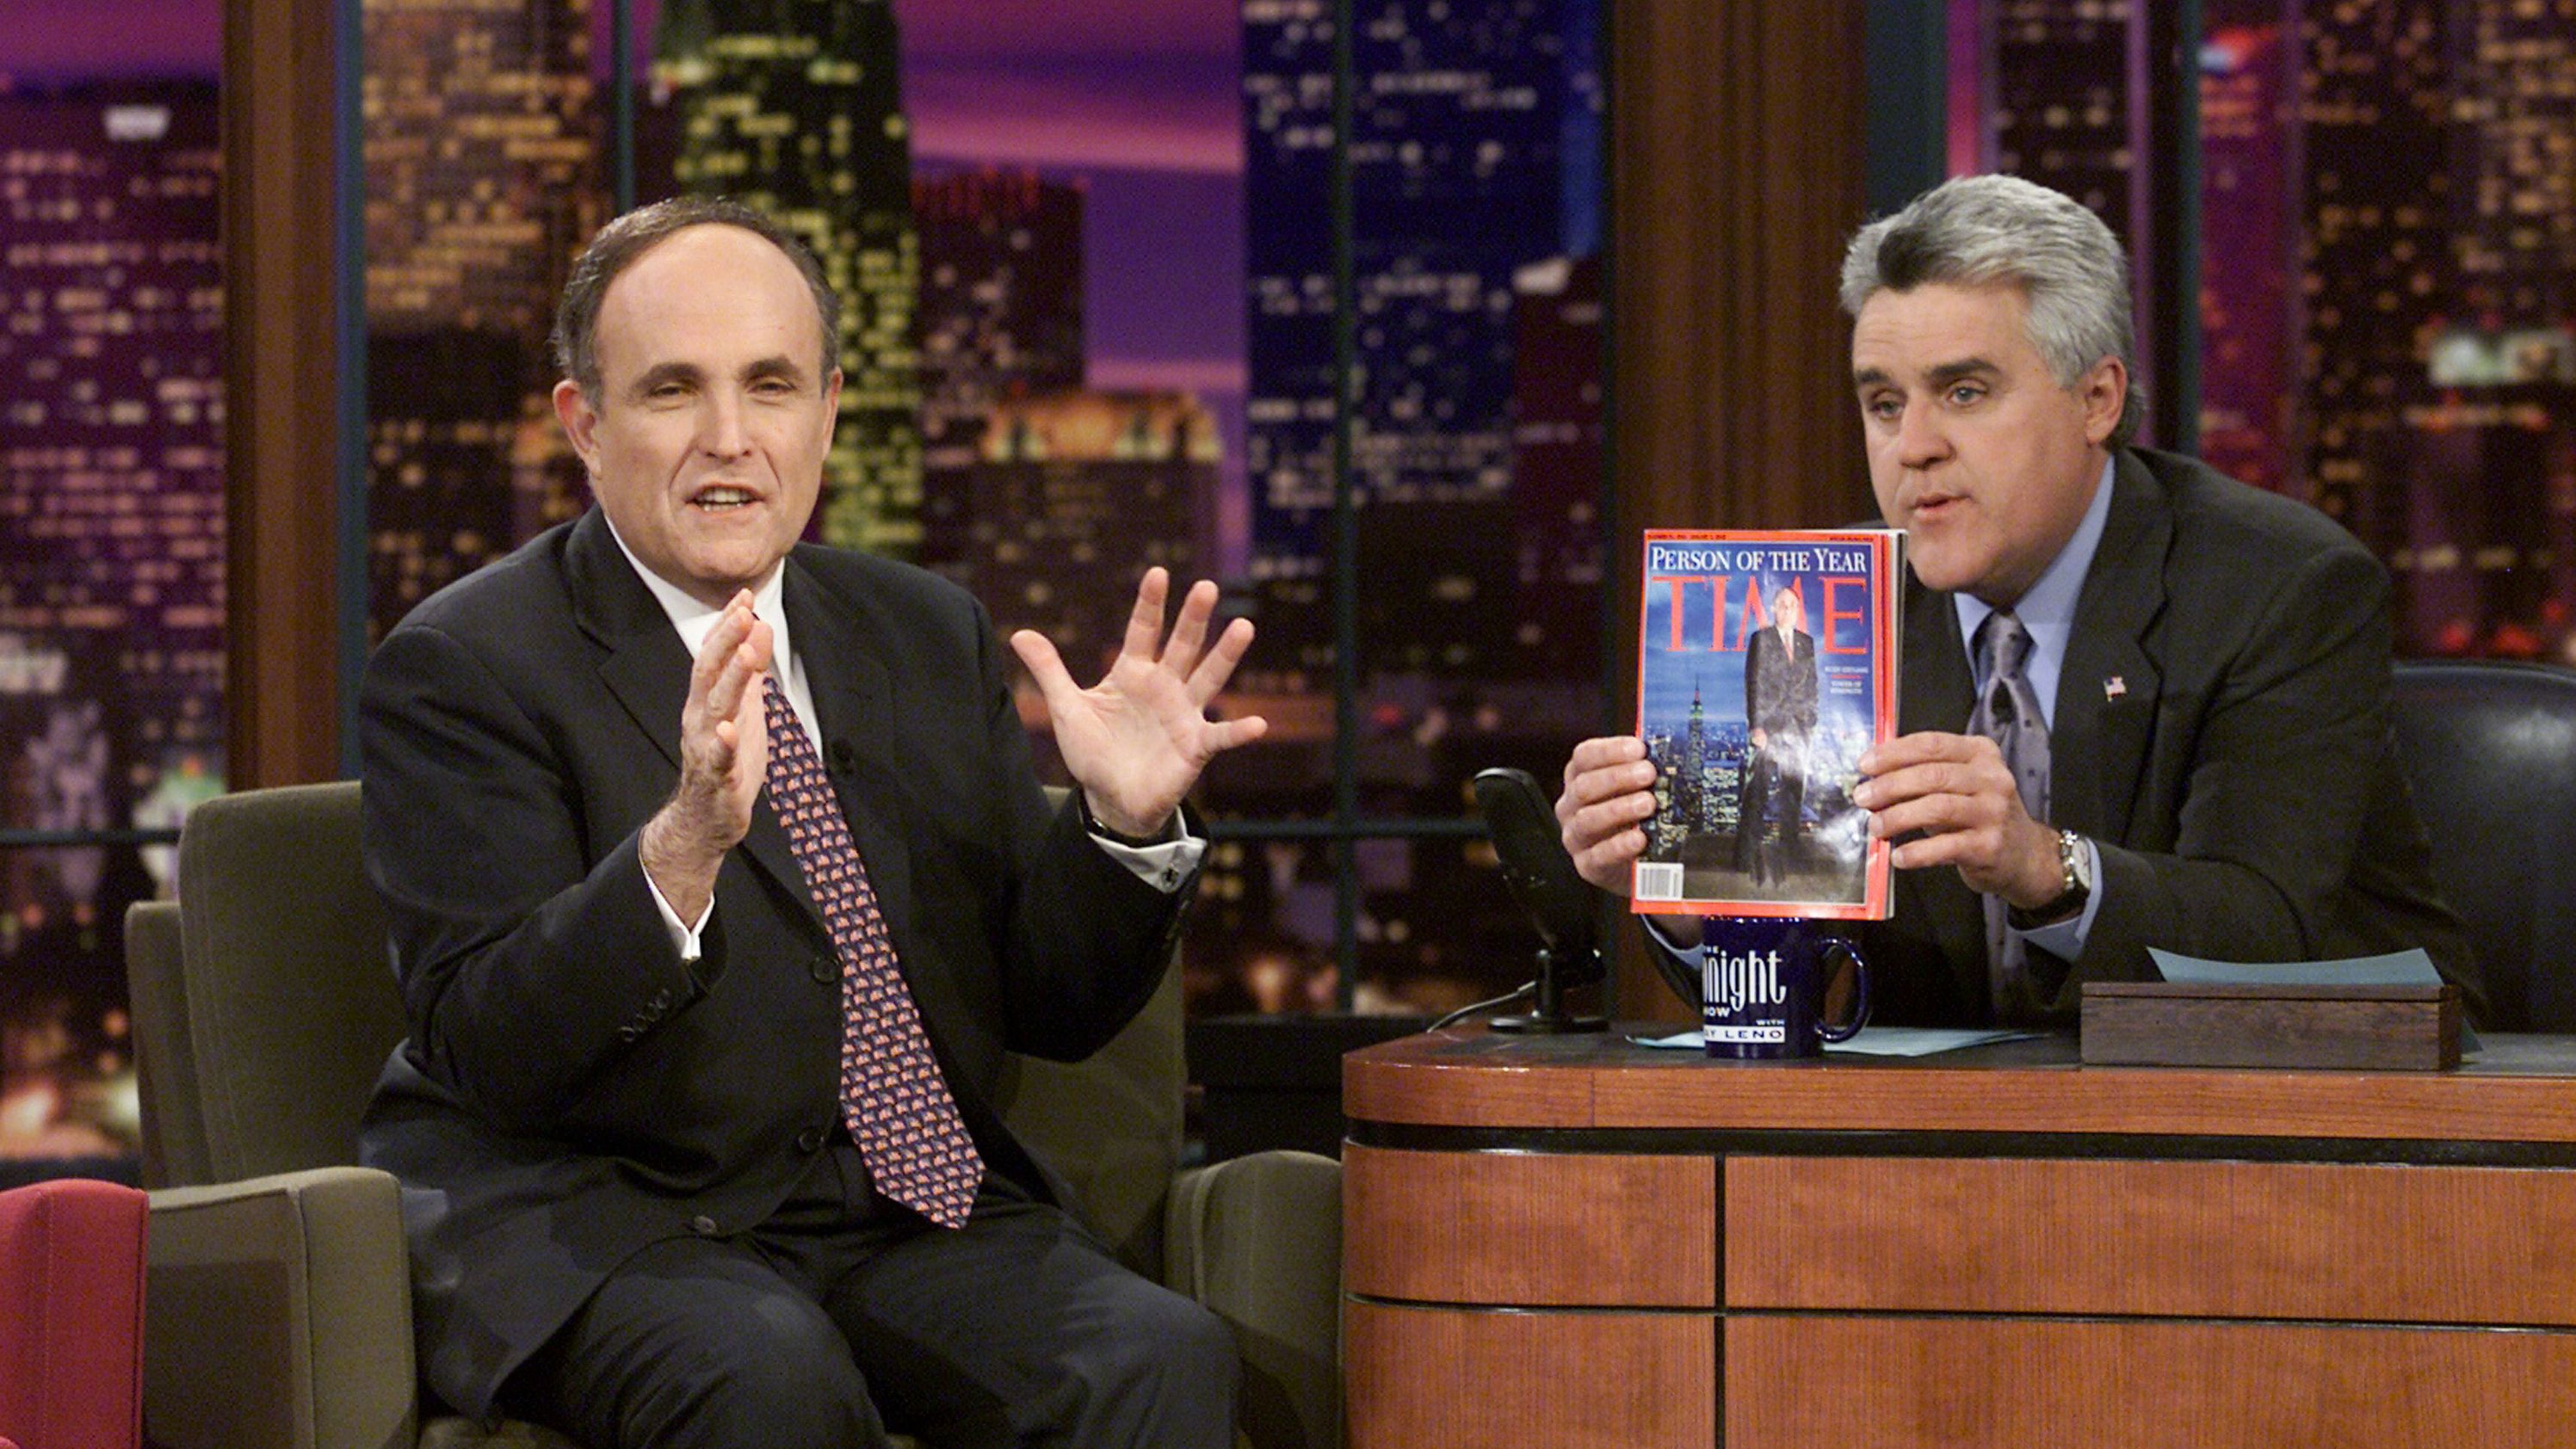 Giuliani is interviewed by talk-show host Jay Leno in January 2002. Leno is holding up the Time magazine that named Giuliani as Person of the Year.